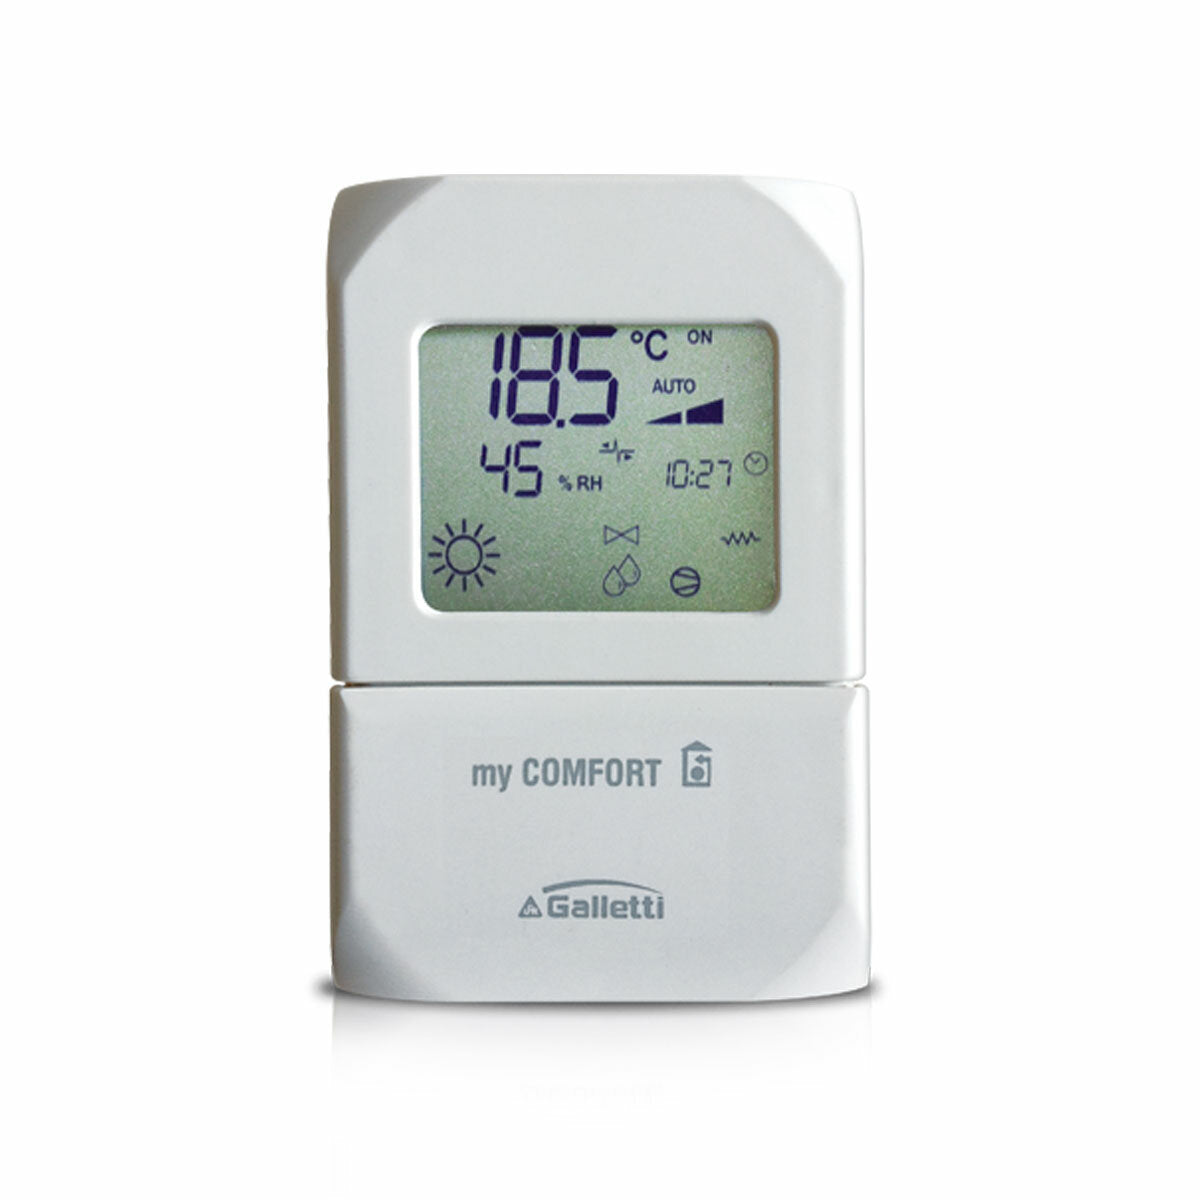 Electronic control Galletti Mycomfort Microprocessor base with LCD display